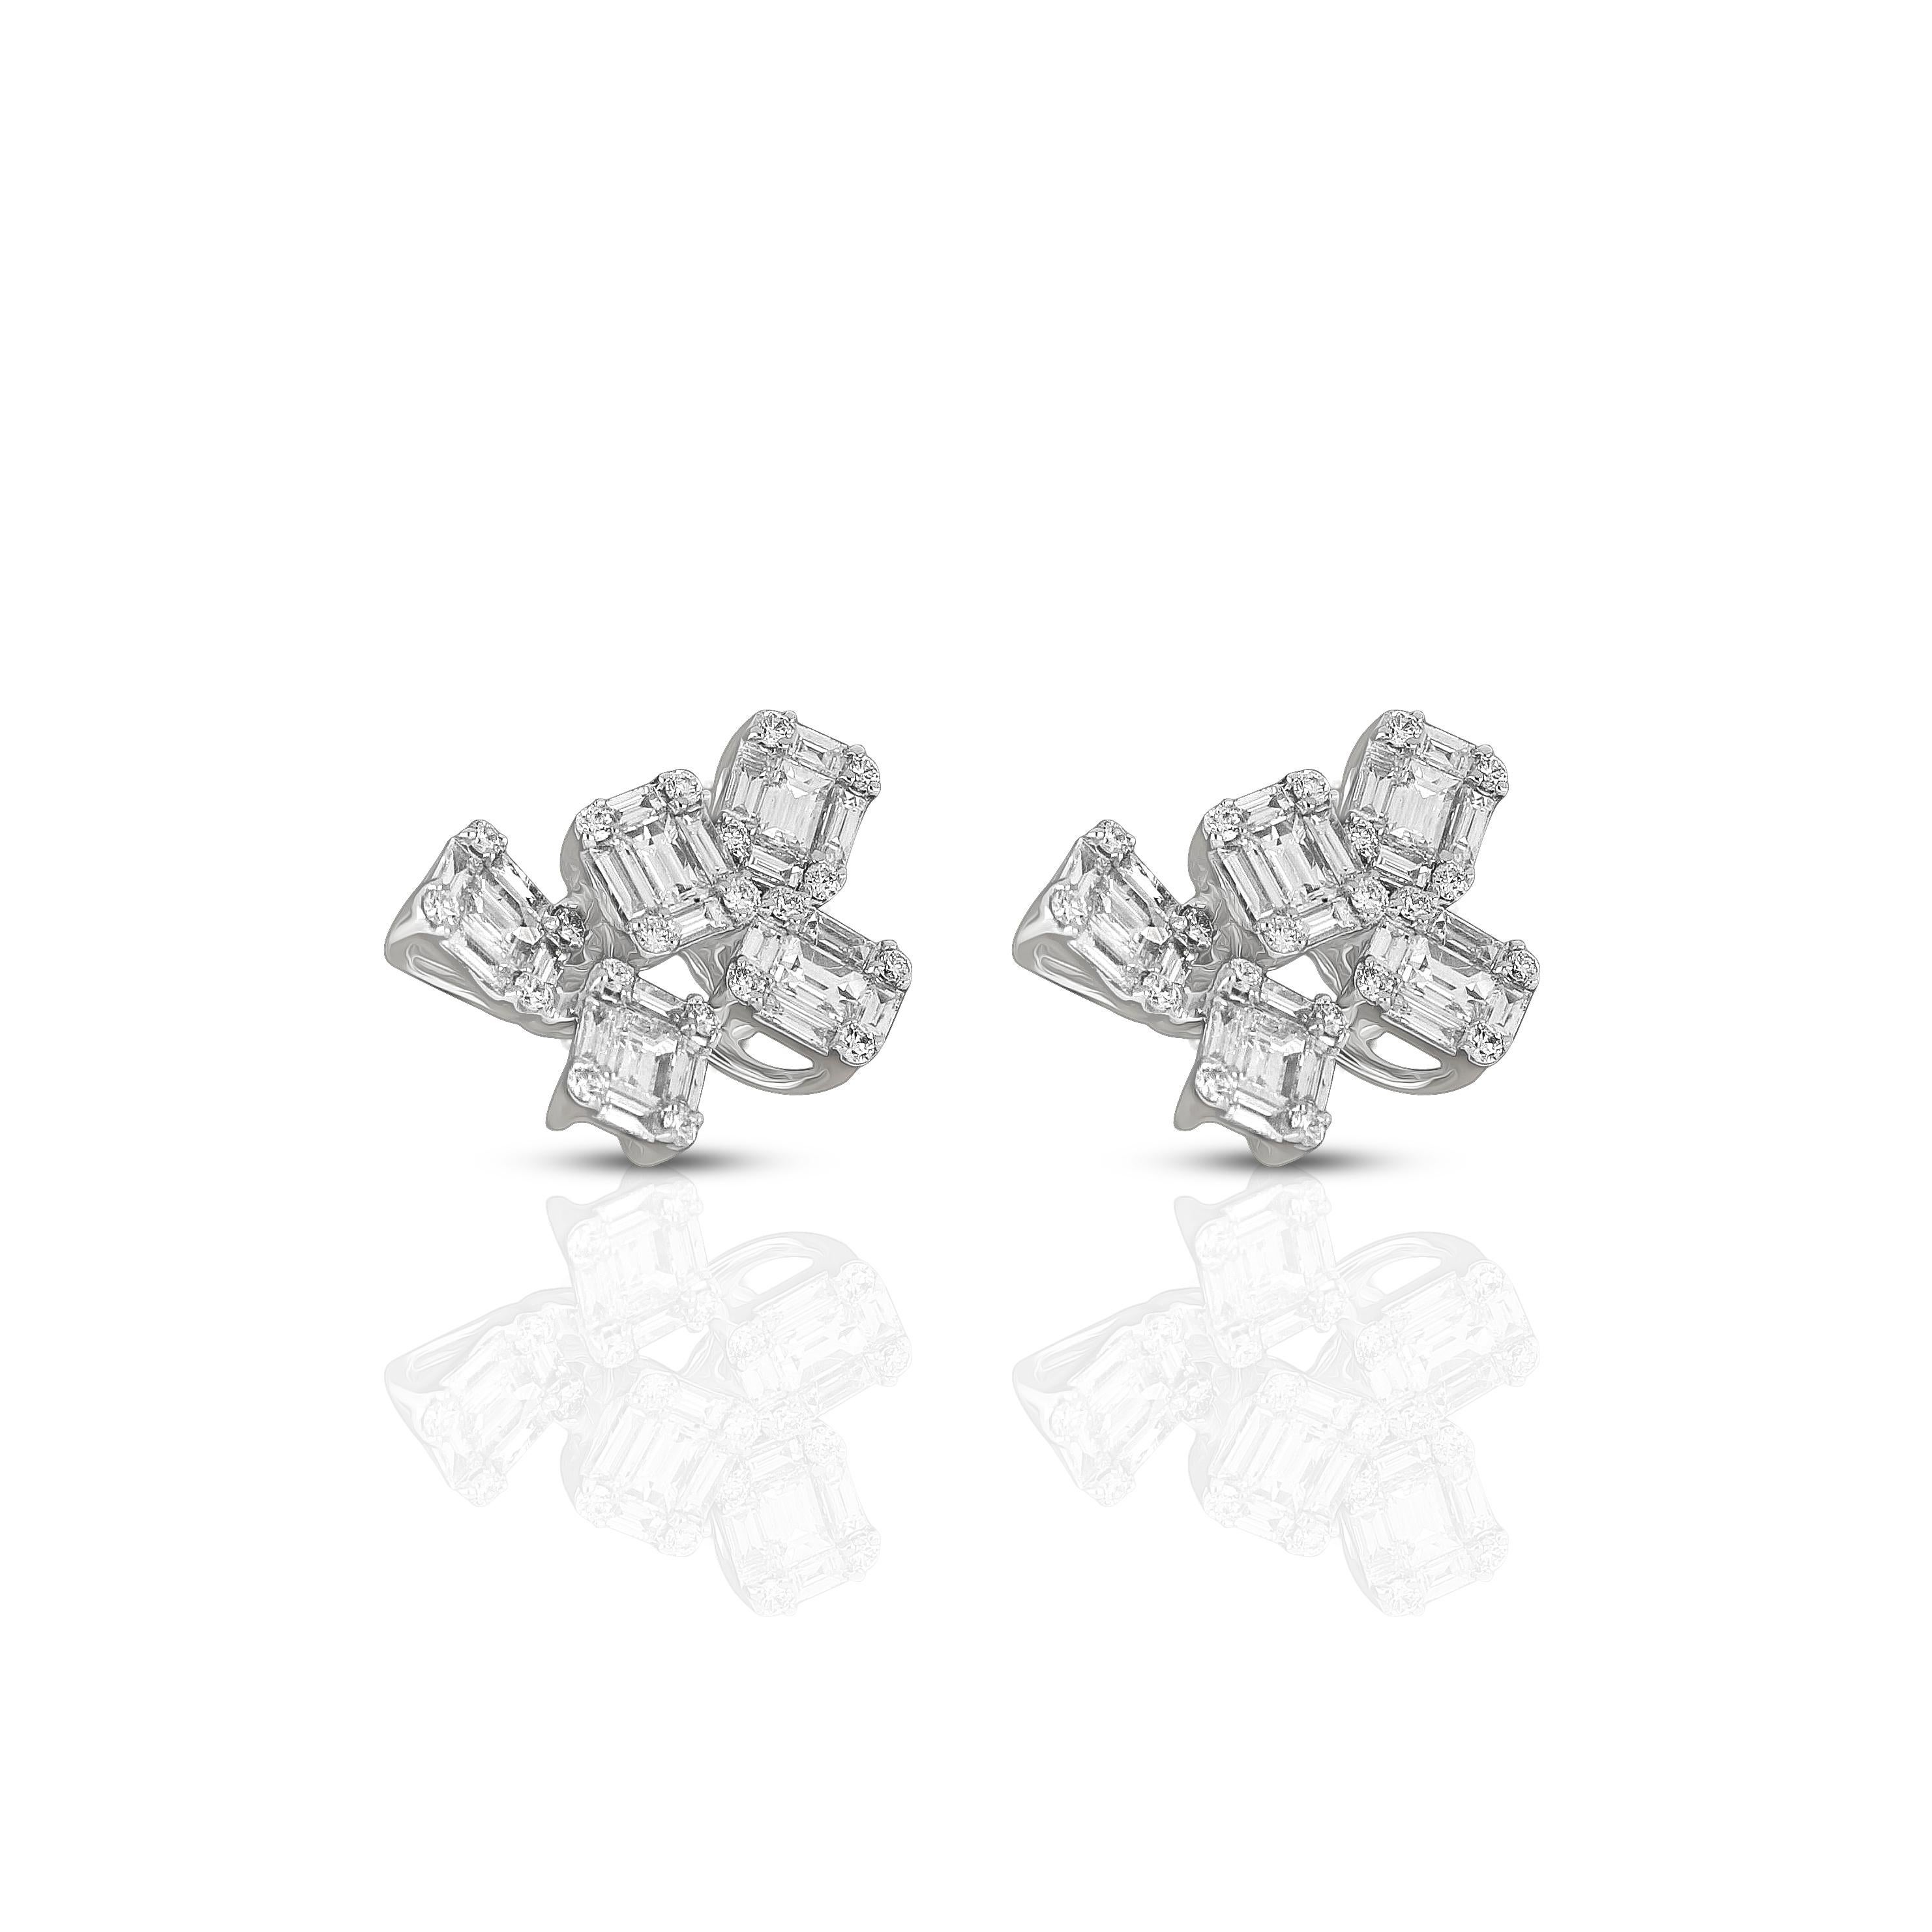 Amwaj stylish 18 karat white gold and diamond earrings that you will wear time and time again, feature a mix of round and baguette cut diamonds that are creatively set by Amwaj craftsmen. The earrings showcase the beauty of the most popular diamond